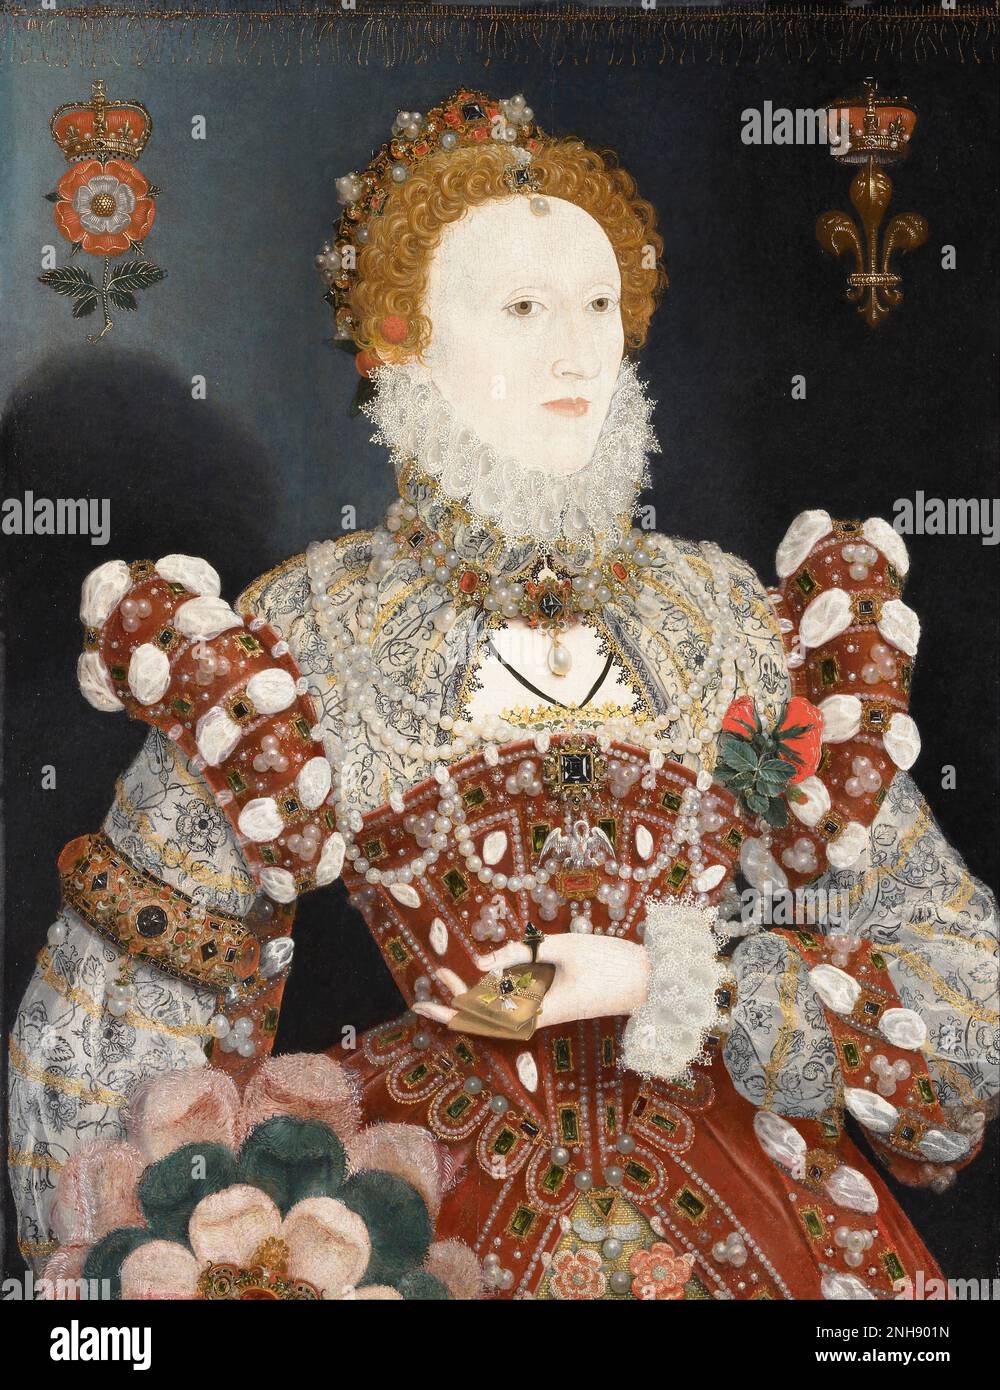 Elizabeth I (1533-1603) was Queen of England and Ireland from 17 November 1558 until her death in 1603. She was the last of the five monarchs of the House of Tudor. Oil on wood panel by Nicholas Hilliard (1547-1619), circa 1573-75. Stock Photo